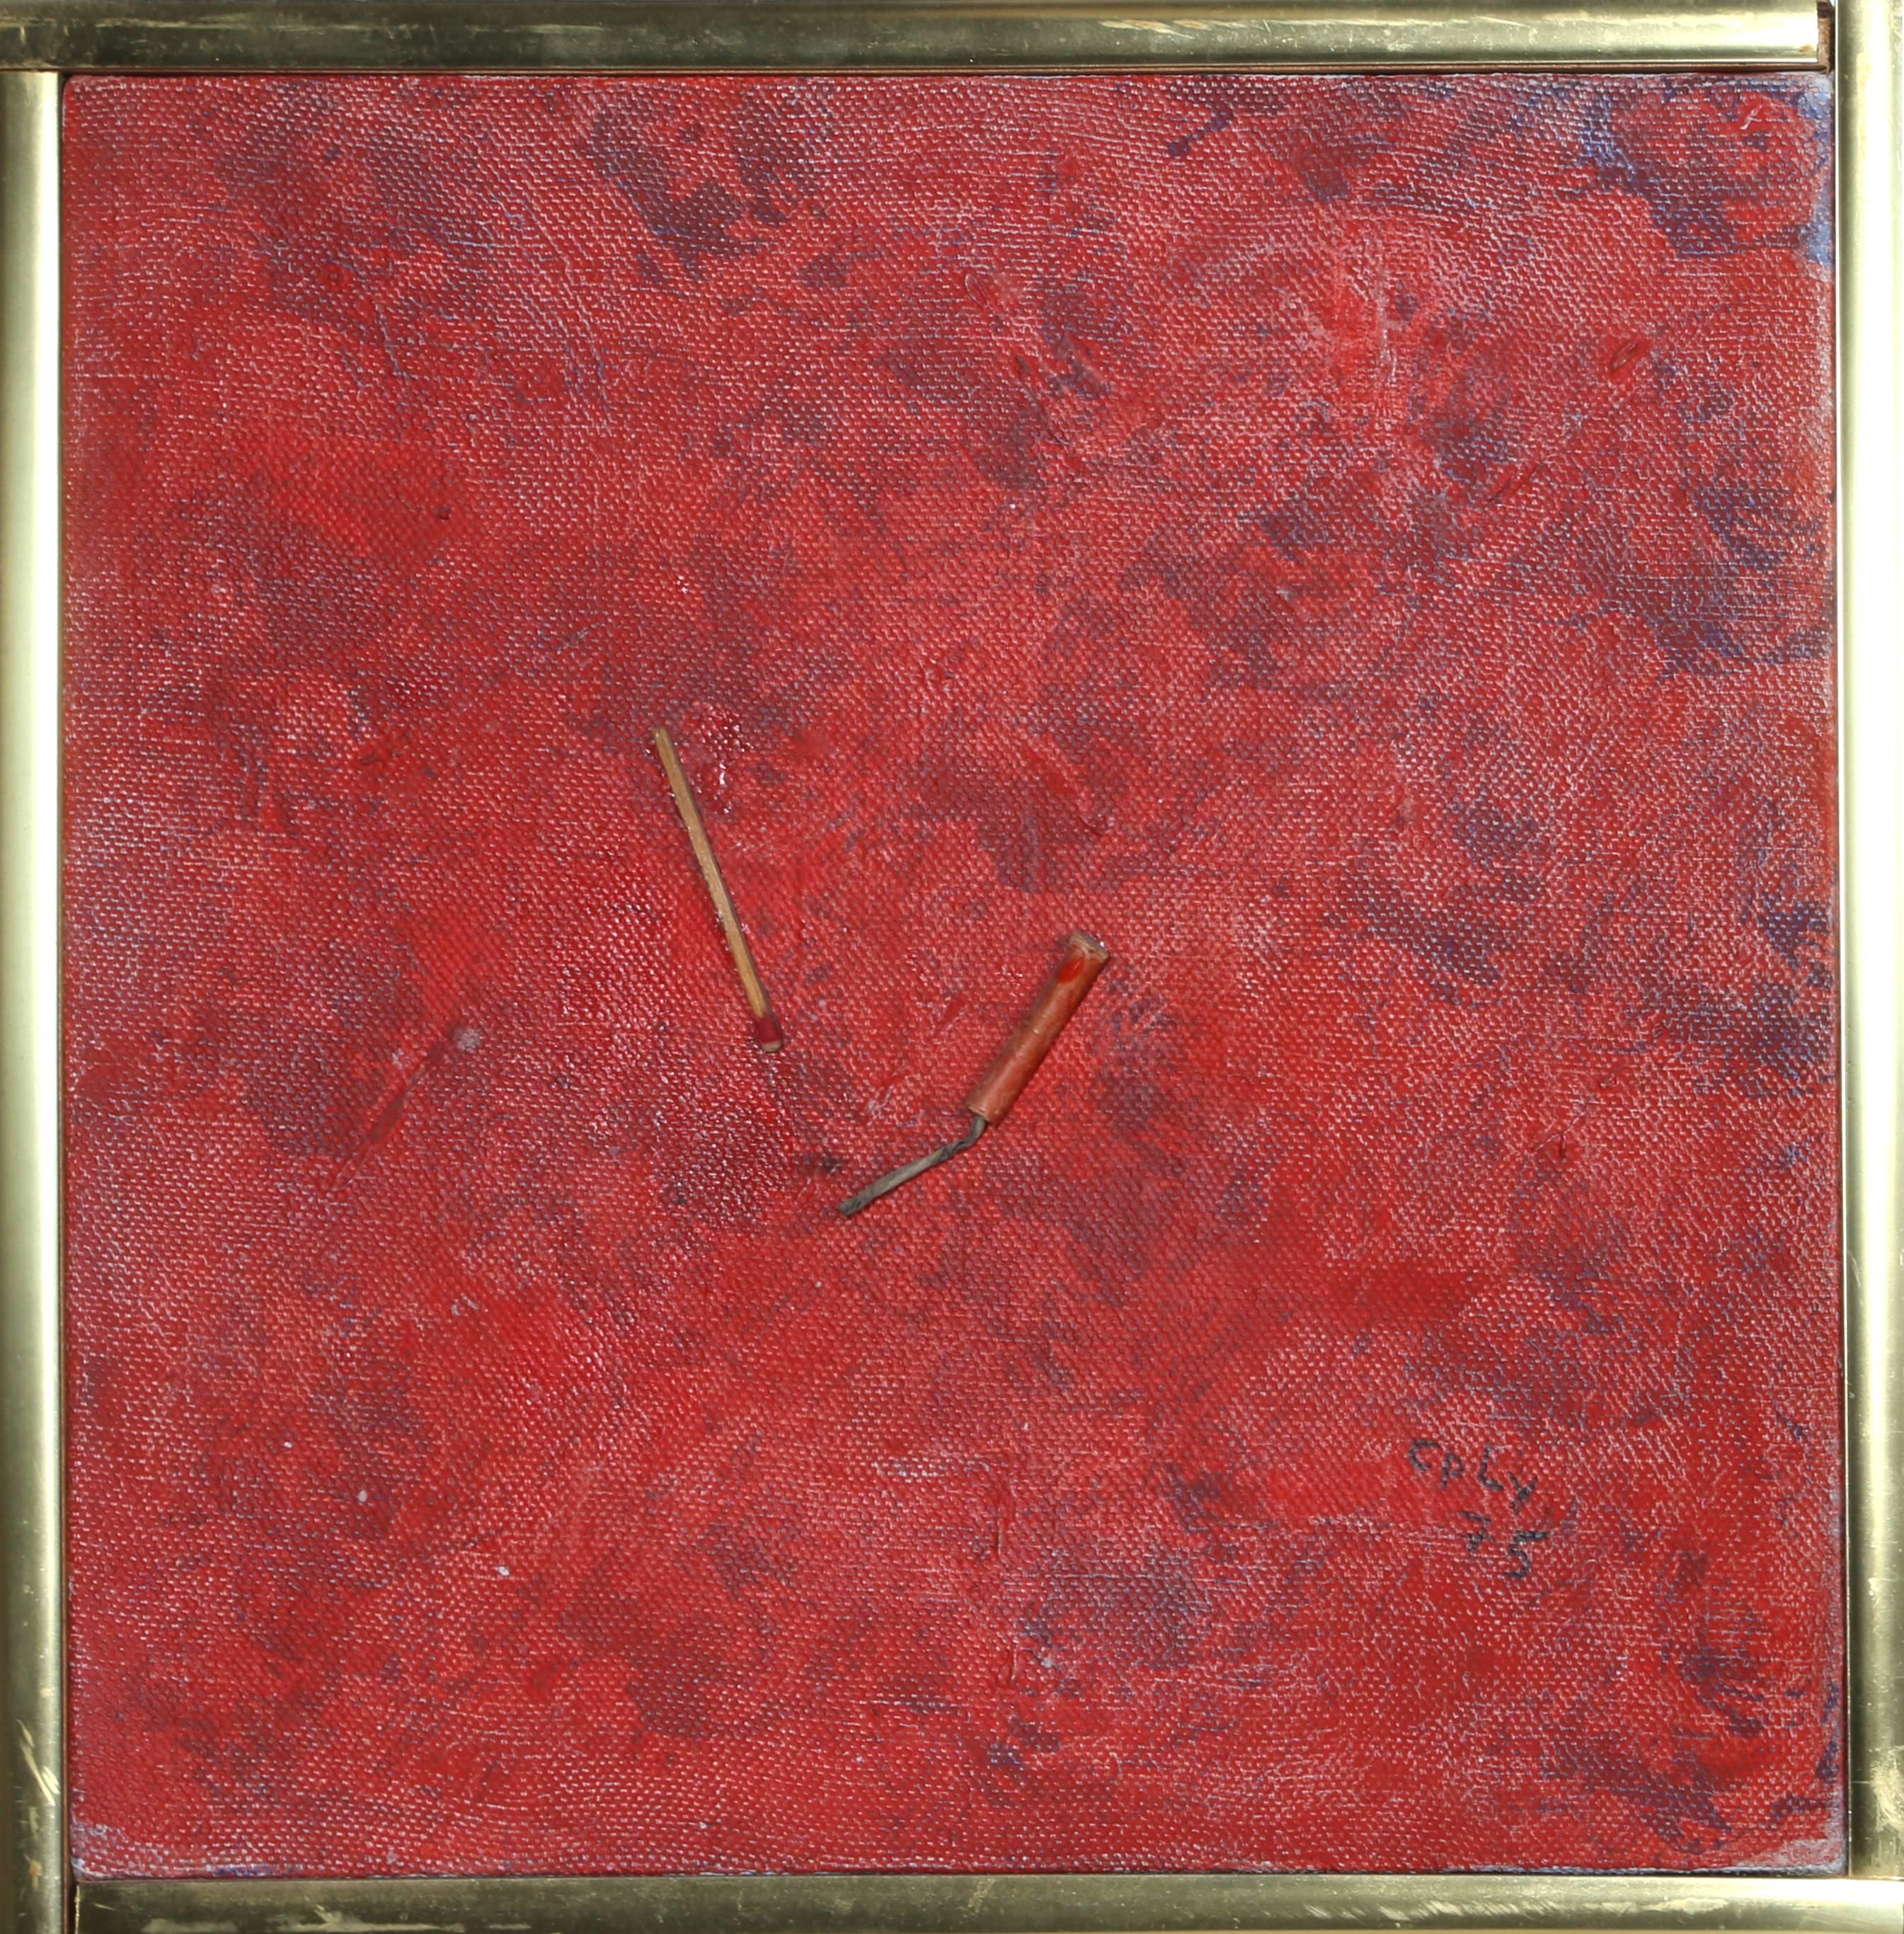 William Nelson Copley Abstract Painting - Firecracker